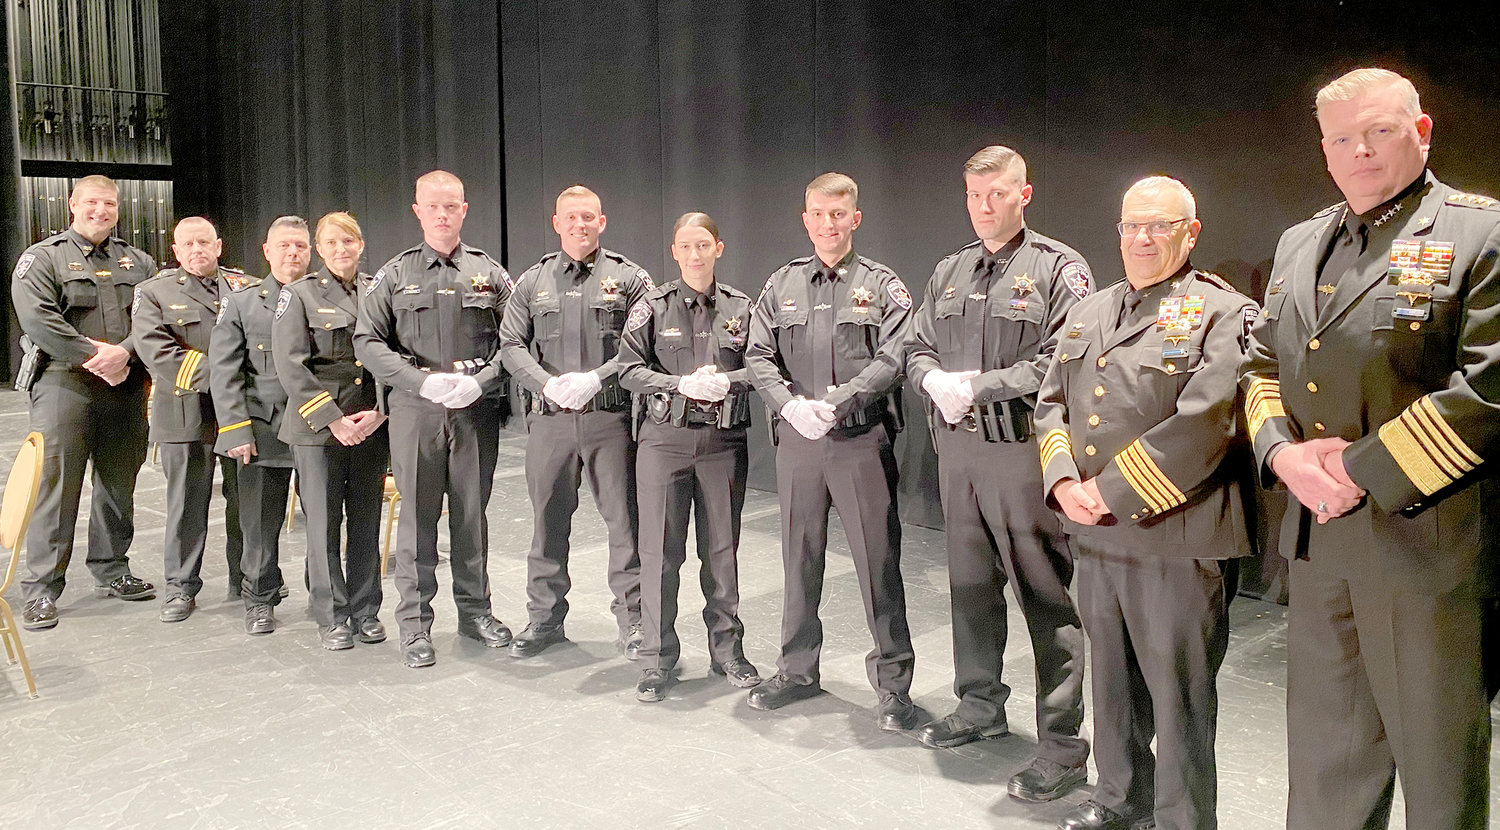 Oneida County Sheriff Robert M. Maciol and Undersheriff Joseph Lisi, at right, pose with new graduates from the Mohawk Valley Police Academy in Utica on Thursday.